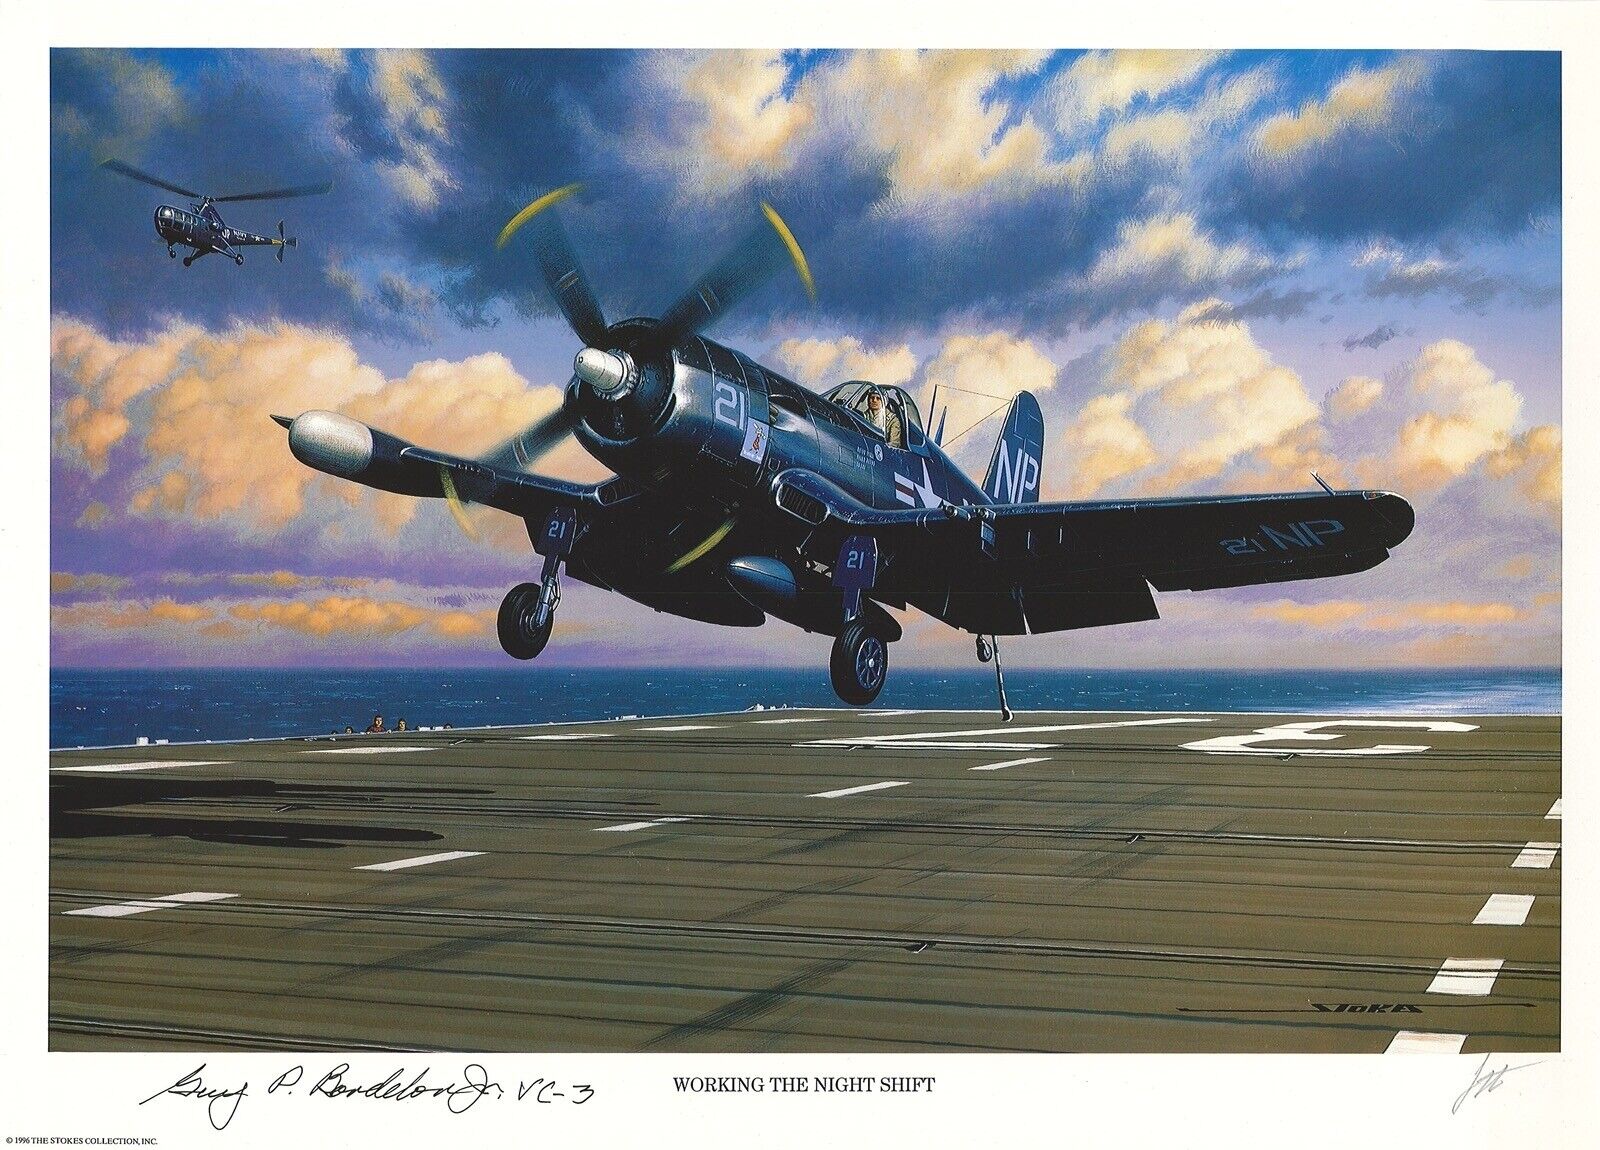 GUY BORDELON HAND SIGNED WORKING THE NIGHT SHIFT PRINT STAN STOKES WWII ACE